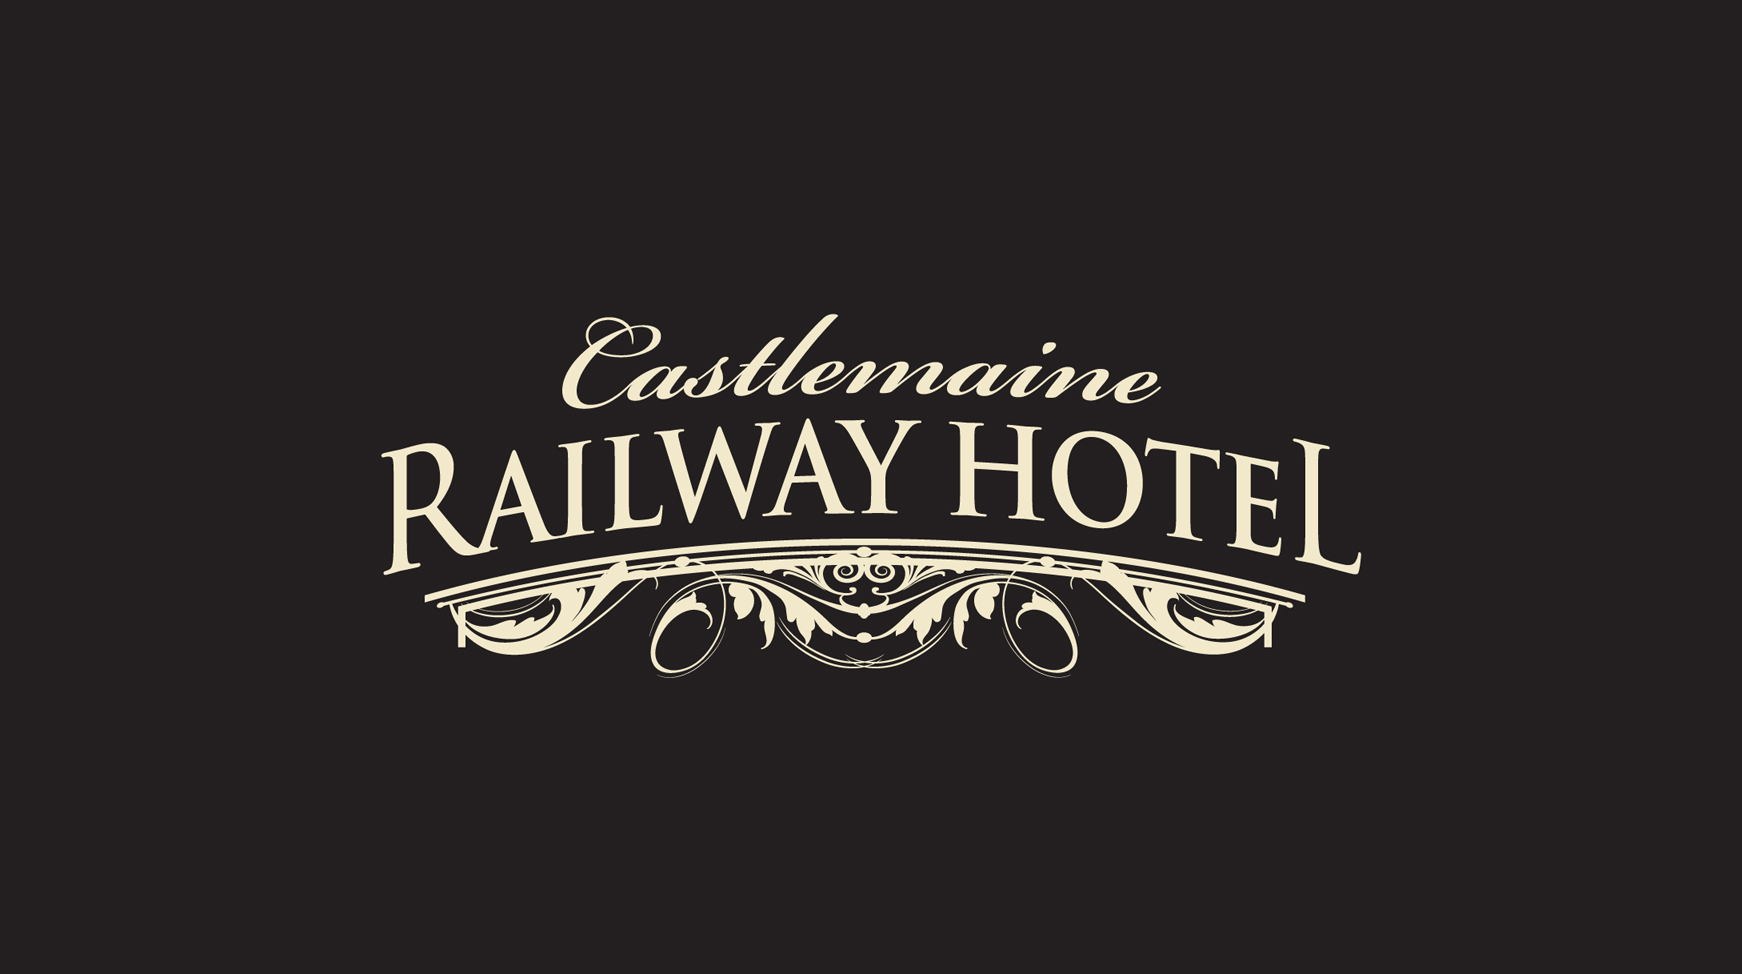 Railway Hotel Castlemaine - Redcliffe Tourism